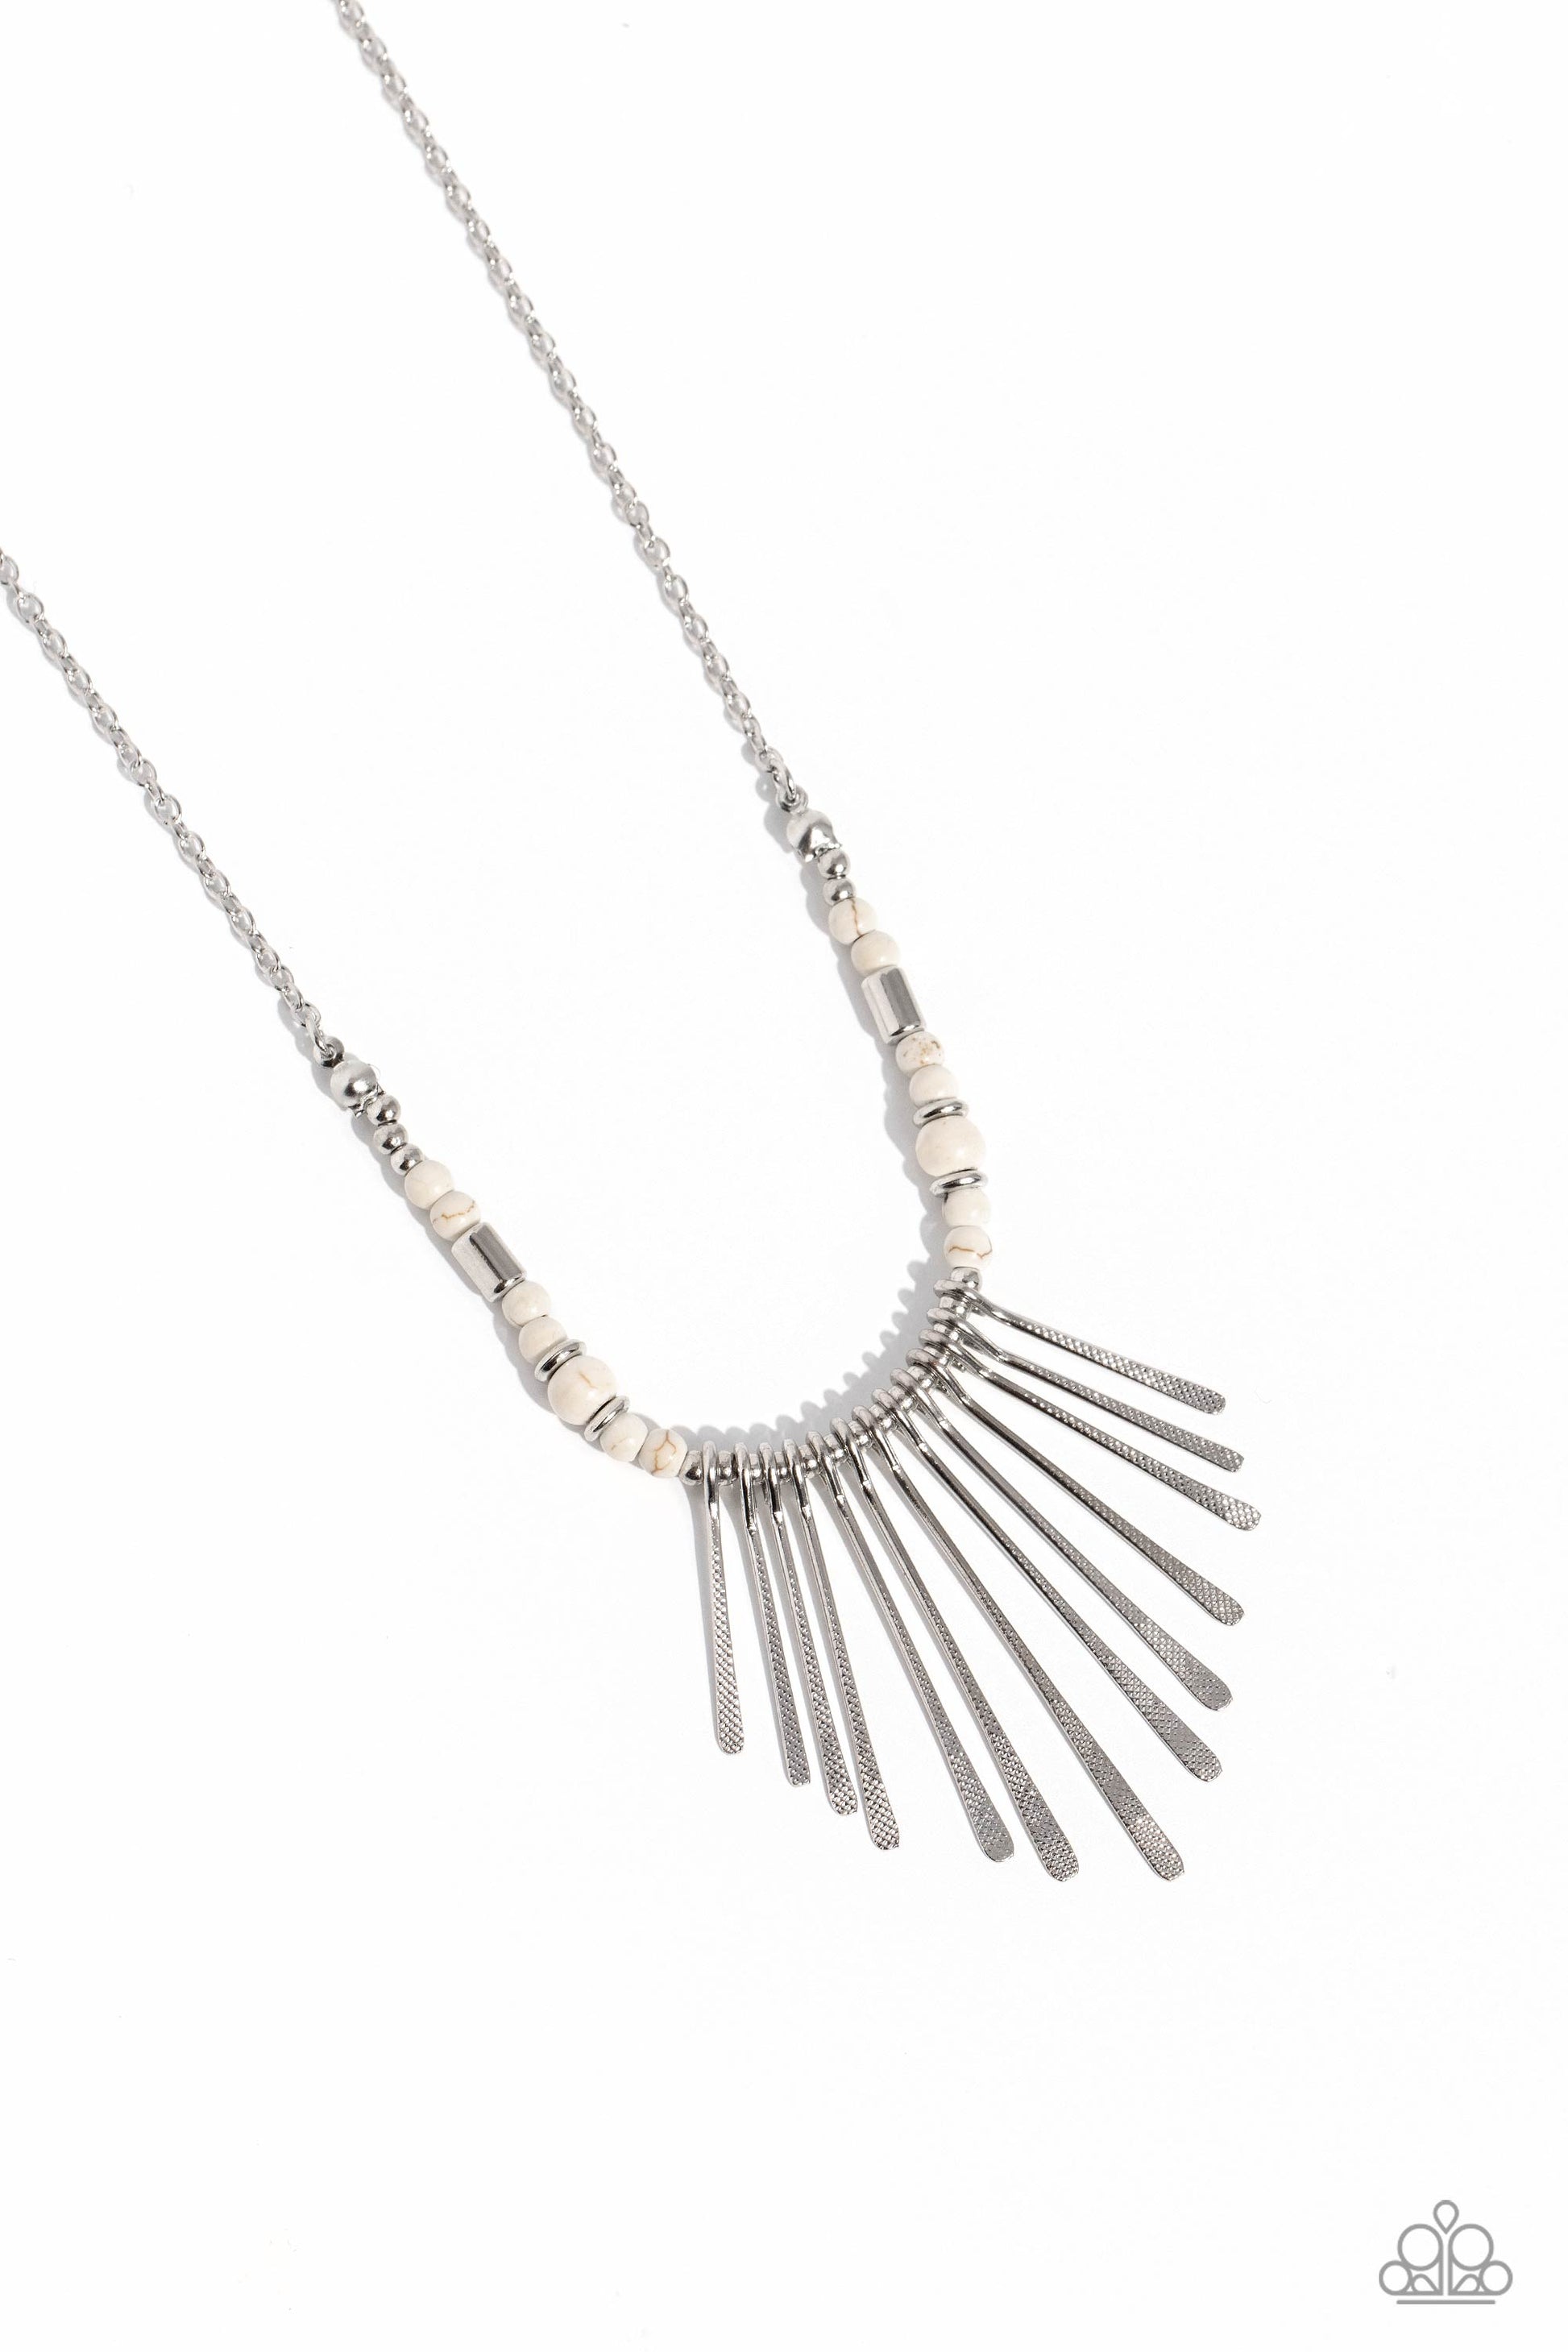 Paparazzi Accessories - CLAWS of Nature - White Necklaces hammered in a dotted motif, a dainty row of silver rods shimmers along an invisible wire dotted in dainty silver and white stone beads. Attached to a dainty silver chain, the tapered fringe flares out below the collar, resulting in an earthy edge. Features an adjustable clasp closure.  Sold as one individual necklace. Includes one pair of matching earrings.